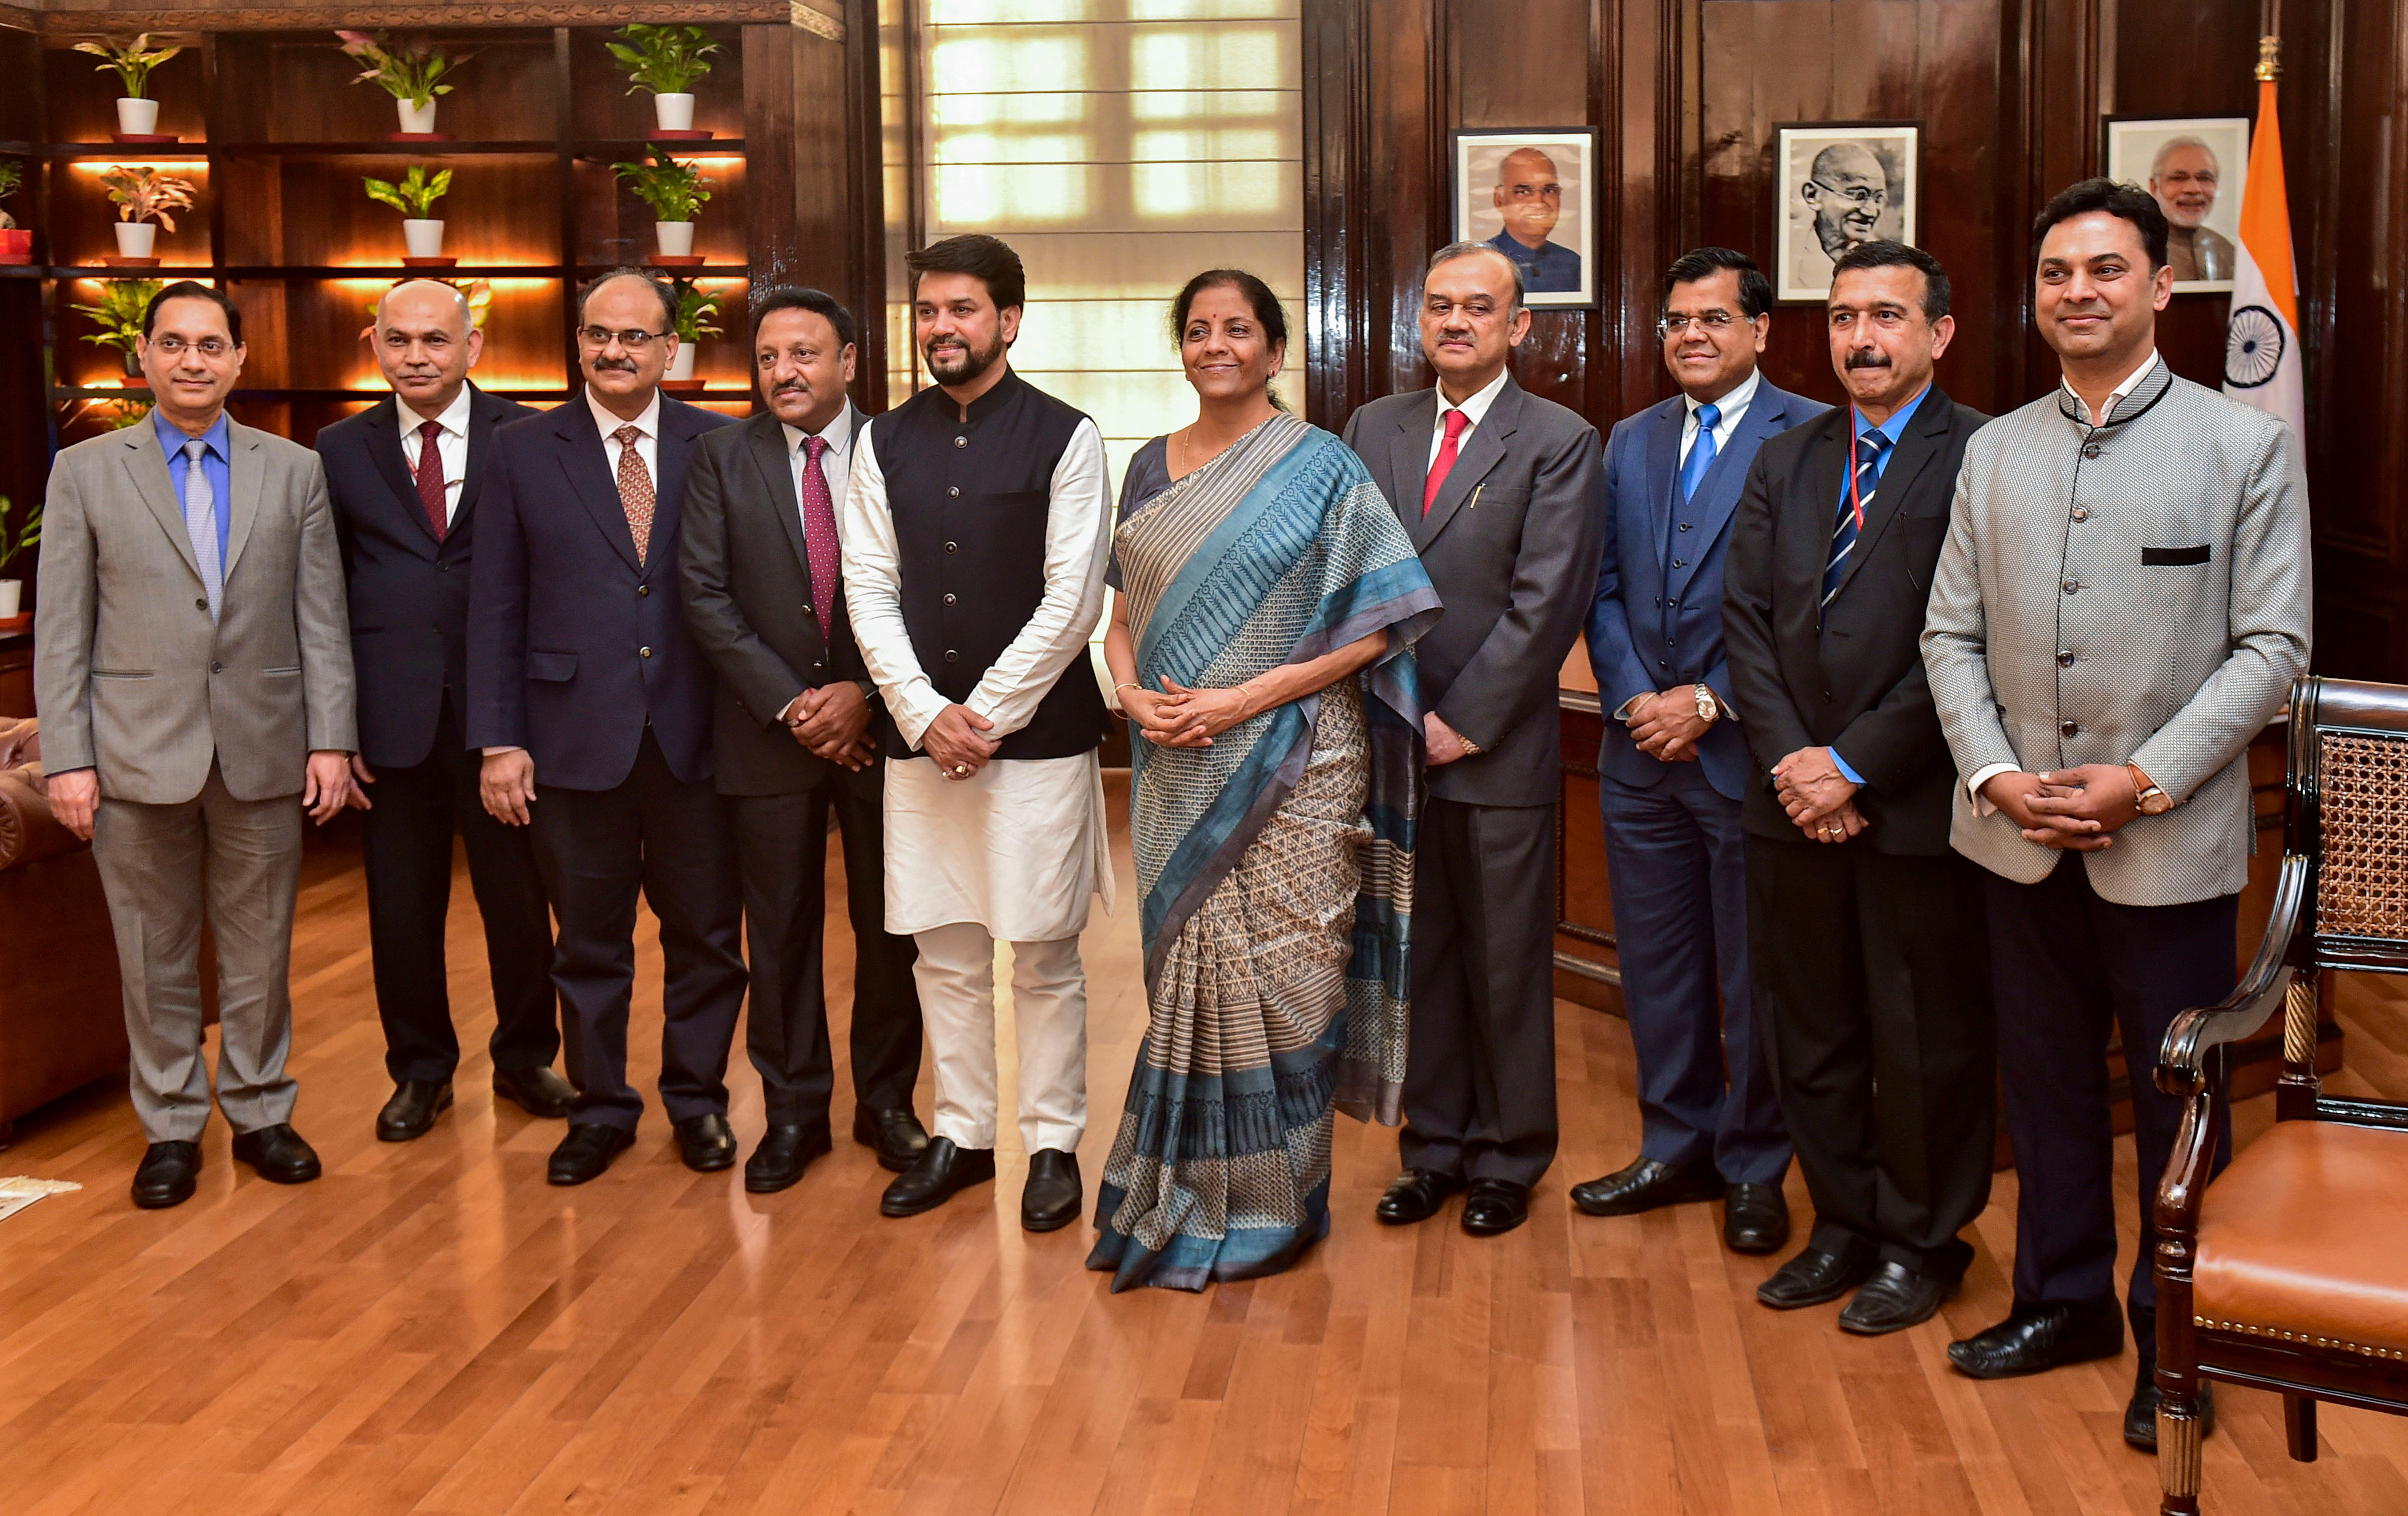 Union Finance Minister Nirmala Sitharaman, MoS Finance Anurag Thakur and finance ministry officials pose for a photograph after giving final touches to the Union Budget 2020-21, at Finance Ministry, in New Delhi. (PTI Photo)